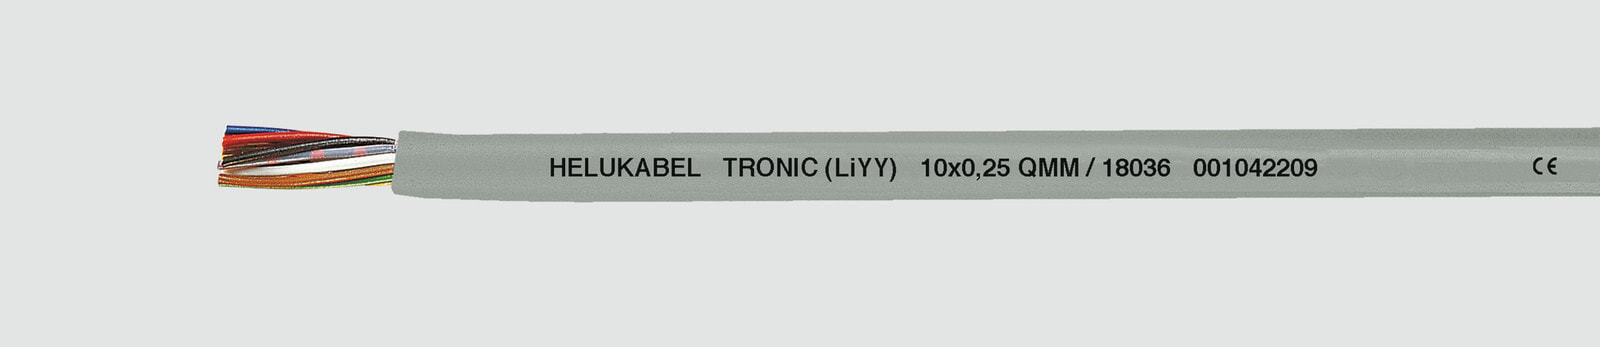 Helukabel TRONIC (LiYY) - Low voltage cable - Grey - Polyvinyl chloride (PVC) - Cooper - 0.14 mm² - 4 kg/km